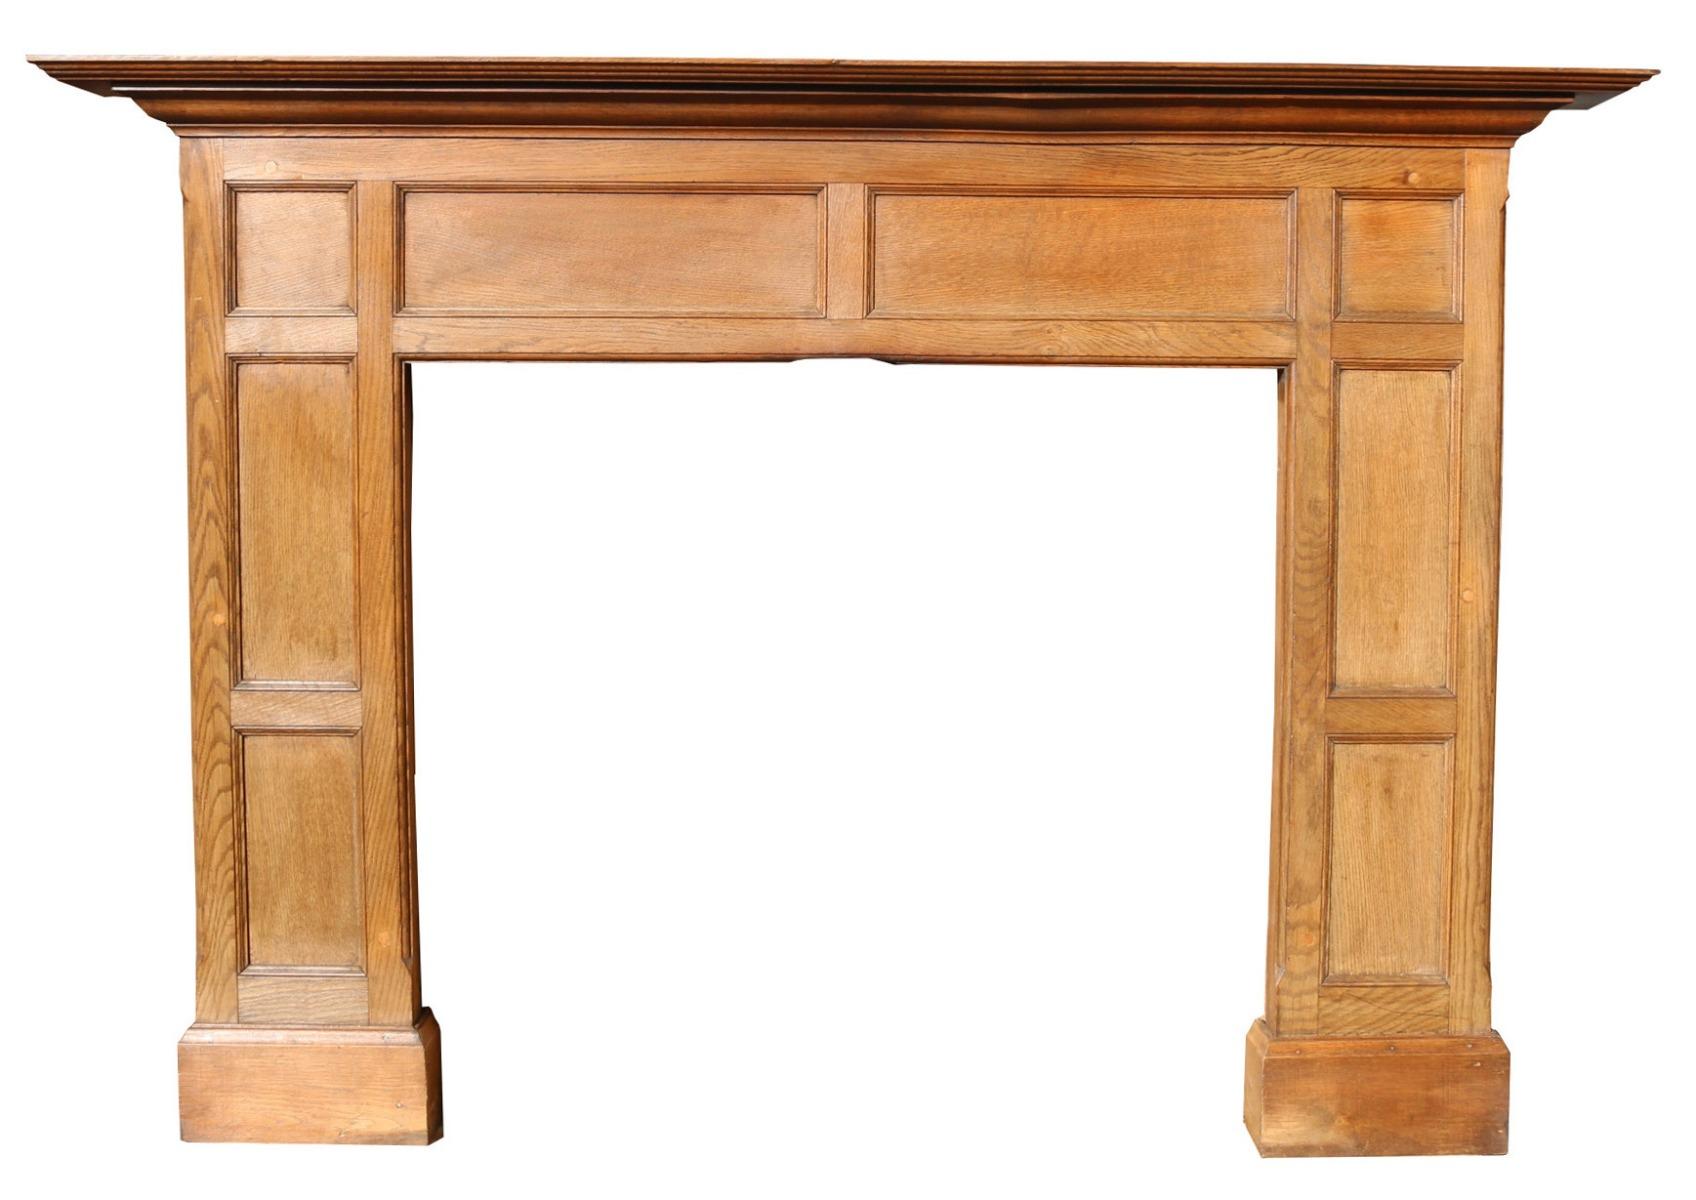 An Edwardian golden oak fire surround, reclaimed from a property in Yorkshire.

Measures: Opening height 106.5 cm

Opening width 116.5 cm

Width between outside of legs  180.5 cm.